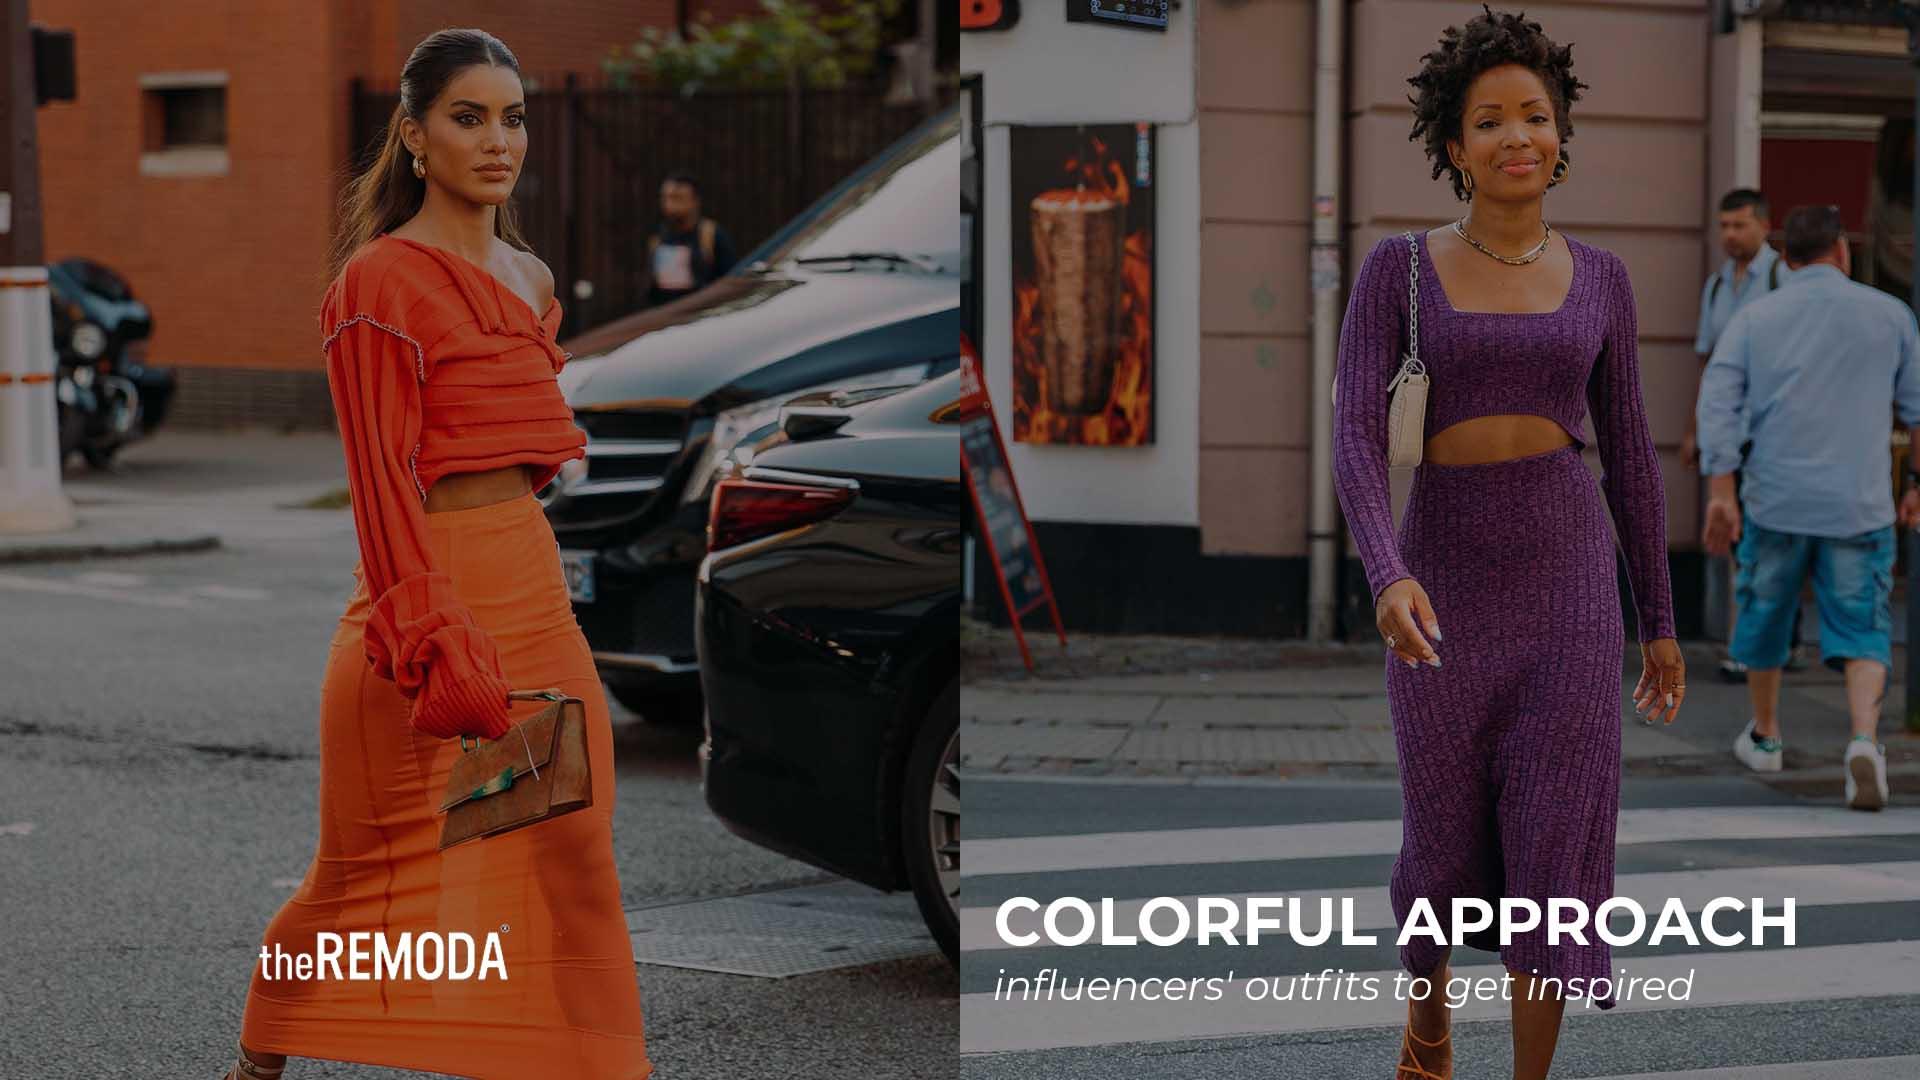 Colorful approach: Influencers' outfits to get inspired - theREMODA